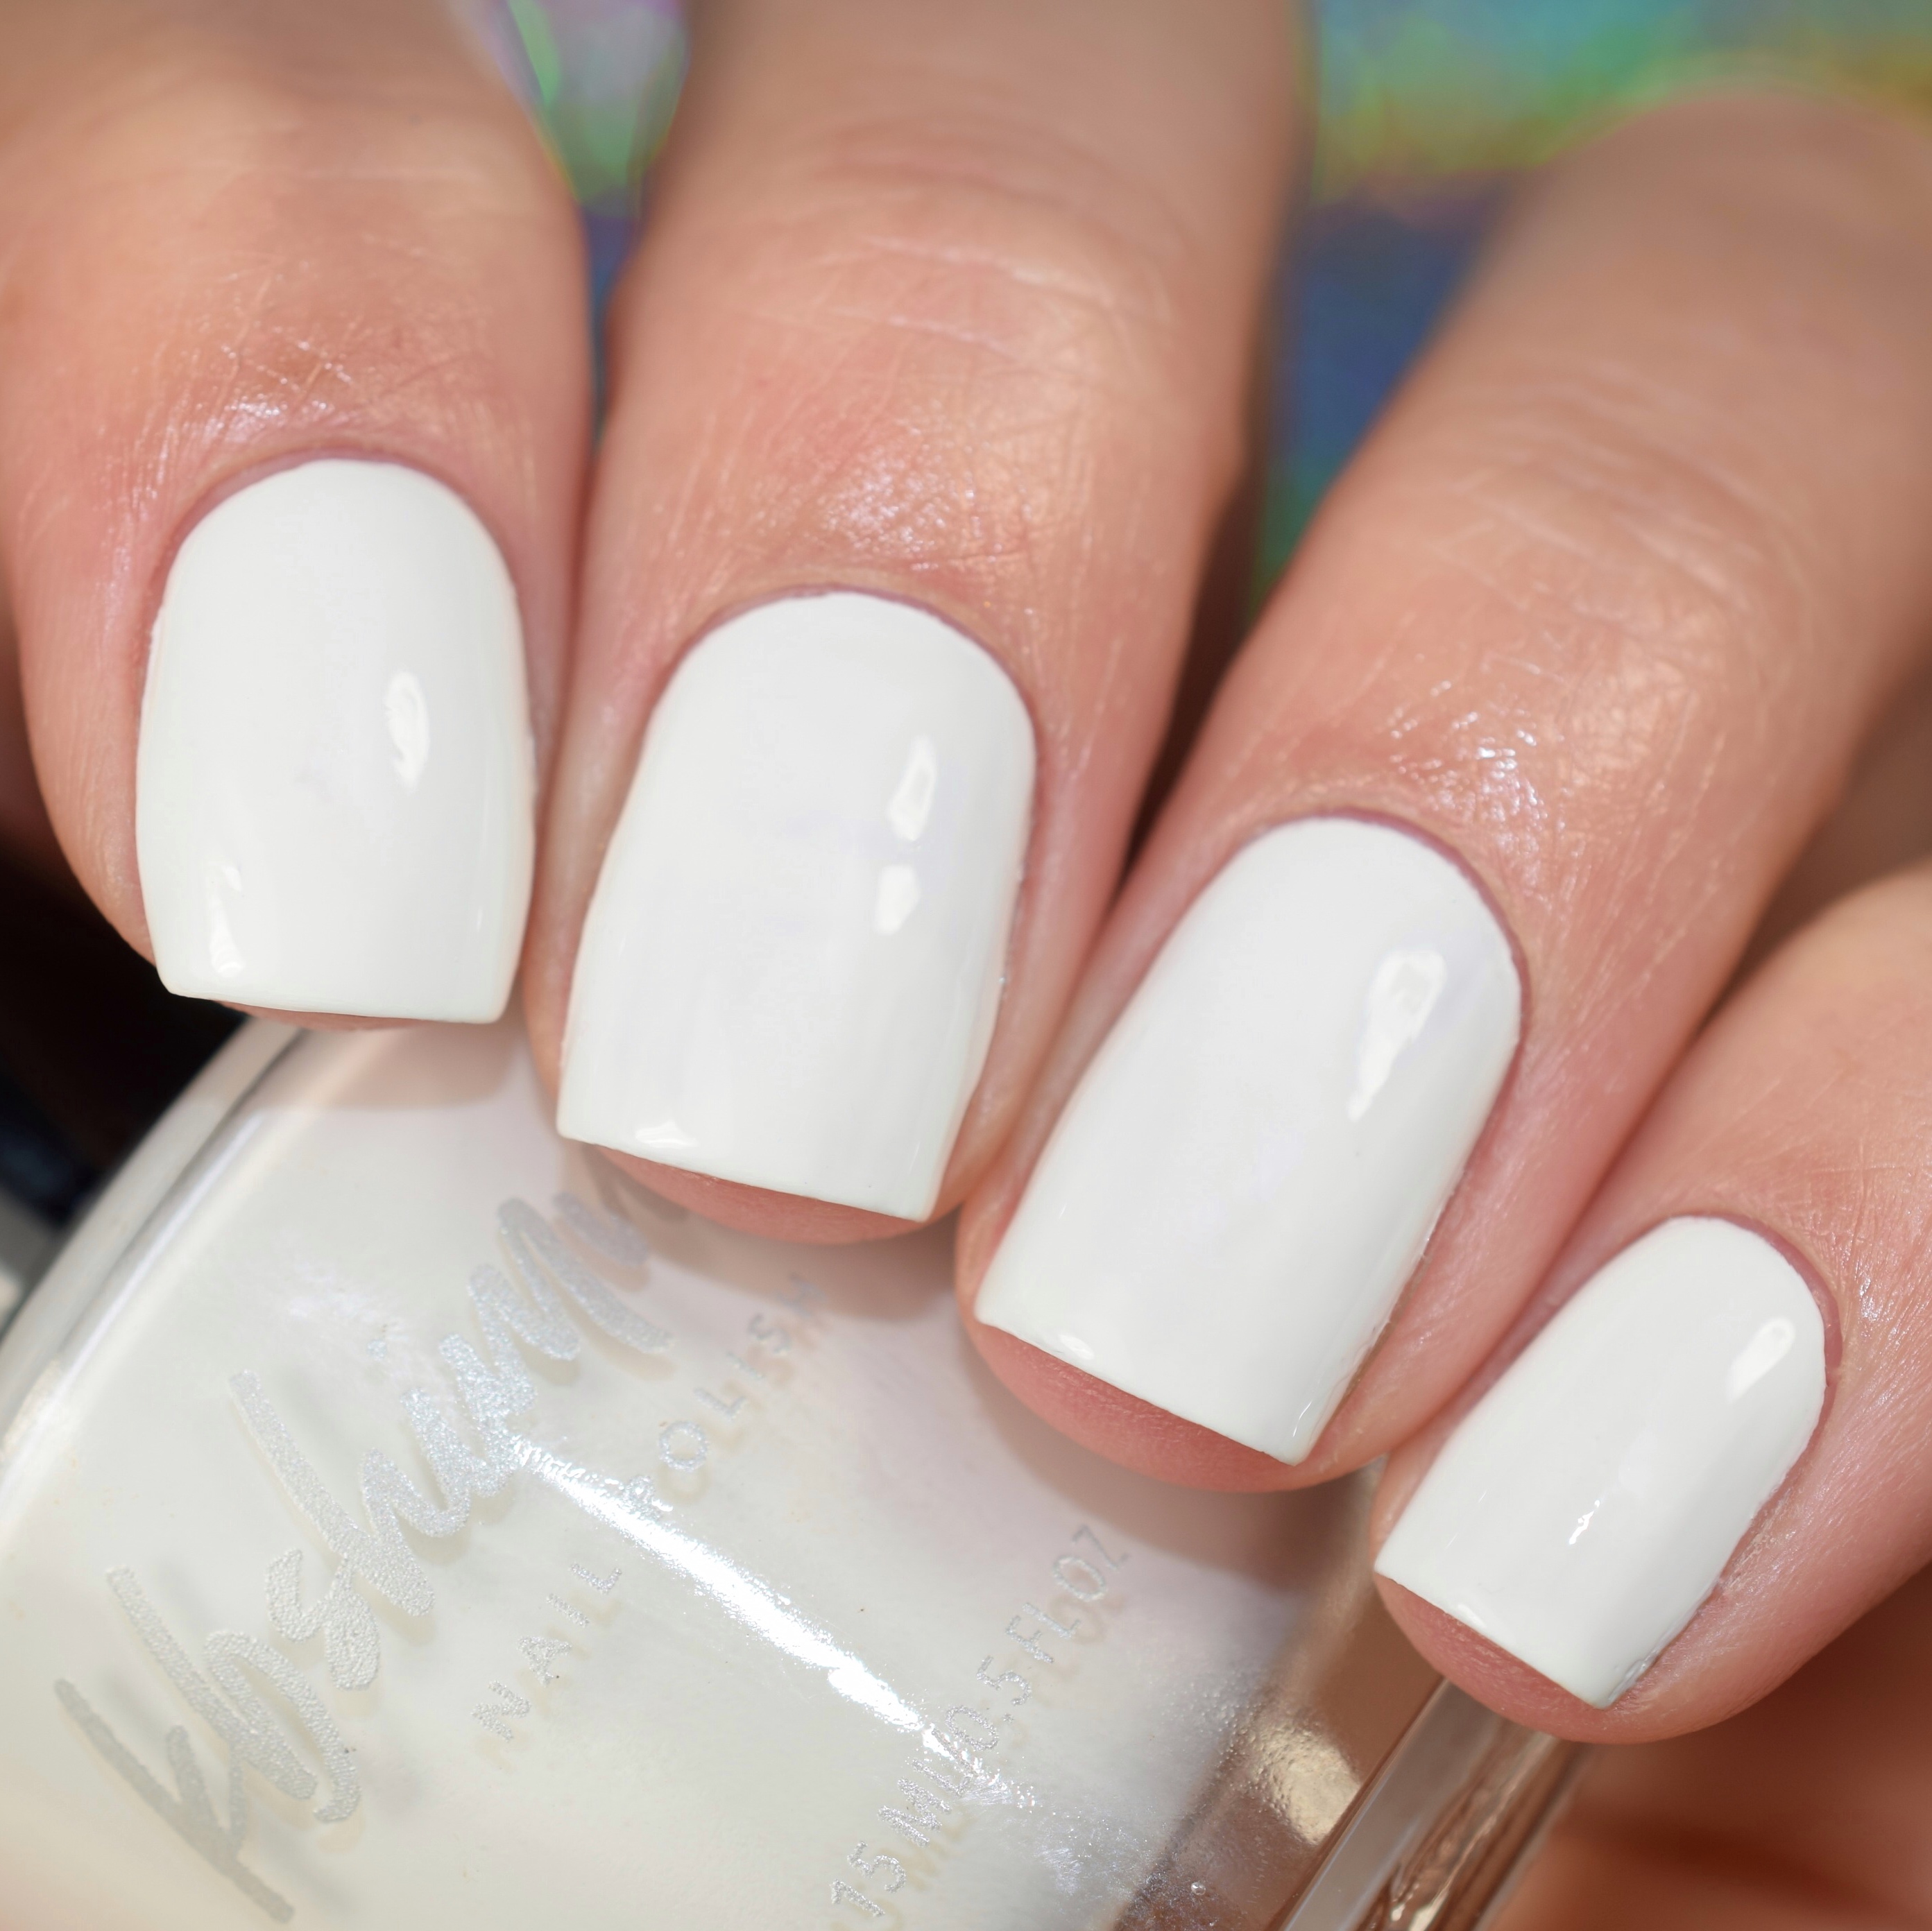 EXTREME+ Gel Matching Lacquer (Duo) - Super White | SamNailSupply.com